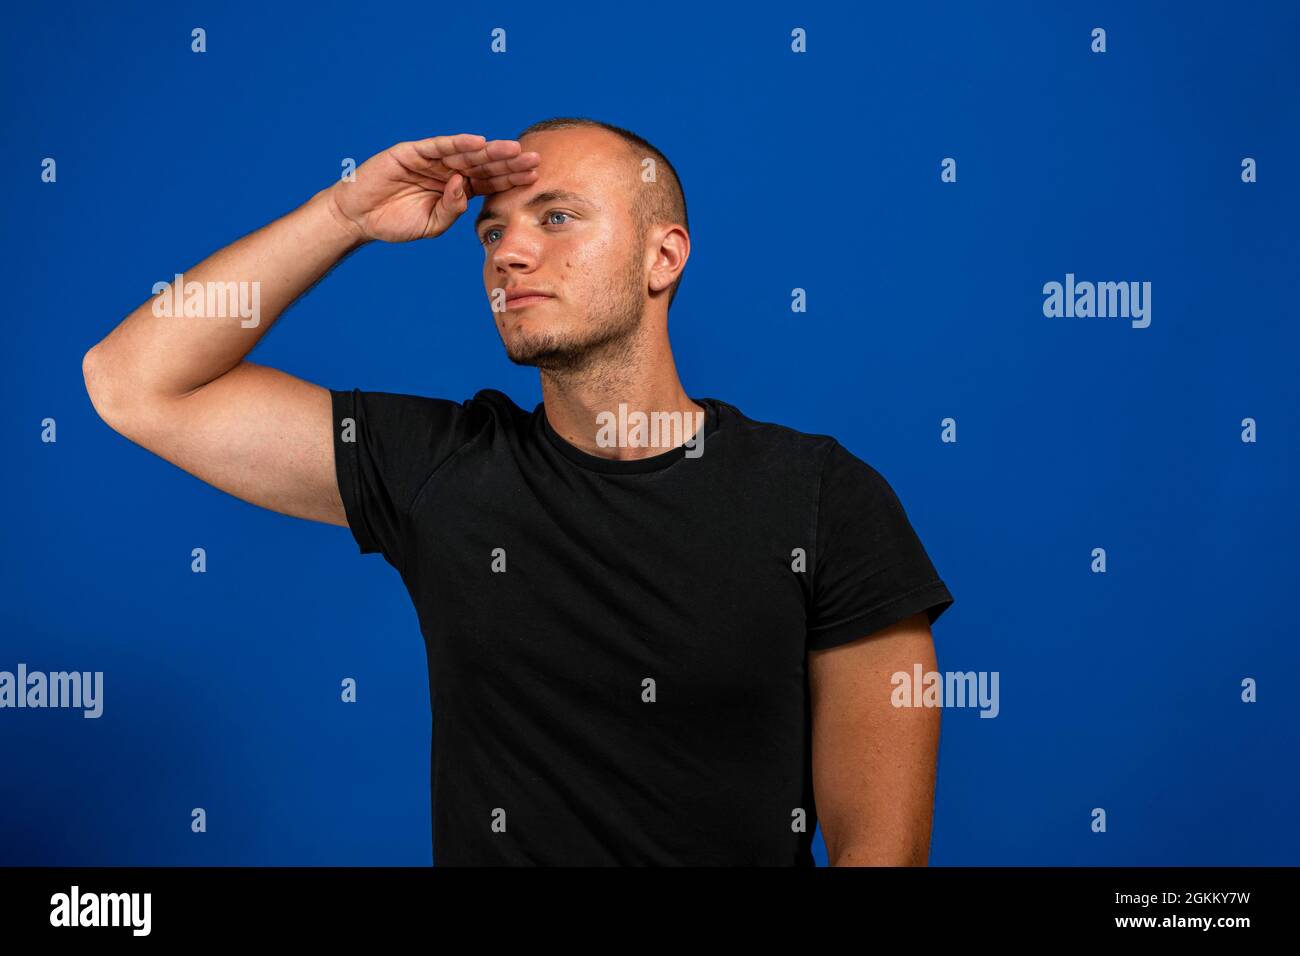 Young man greeting the camera with a military salute in an act of honor and patriotism, showing respect against blue wall Stock Photo